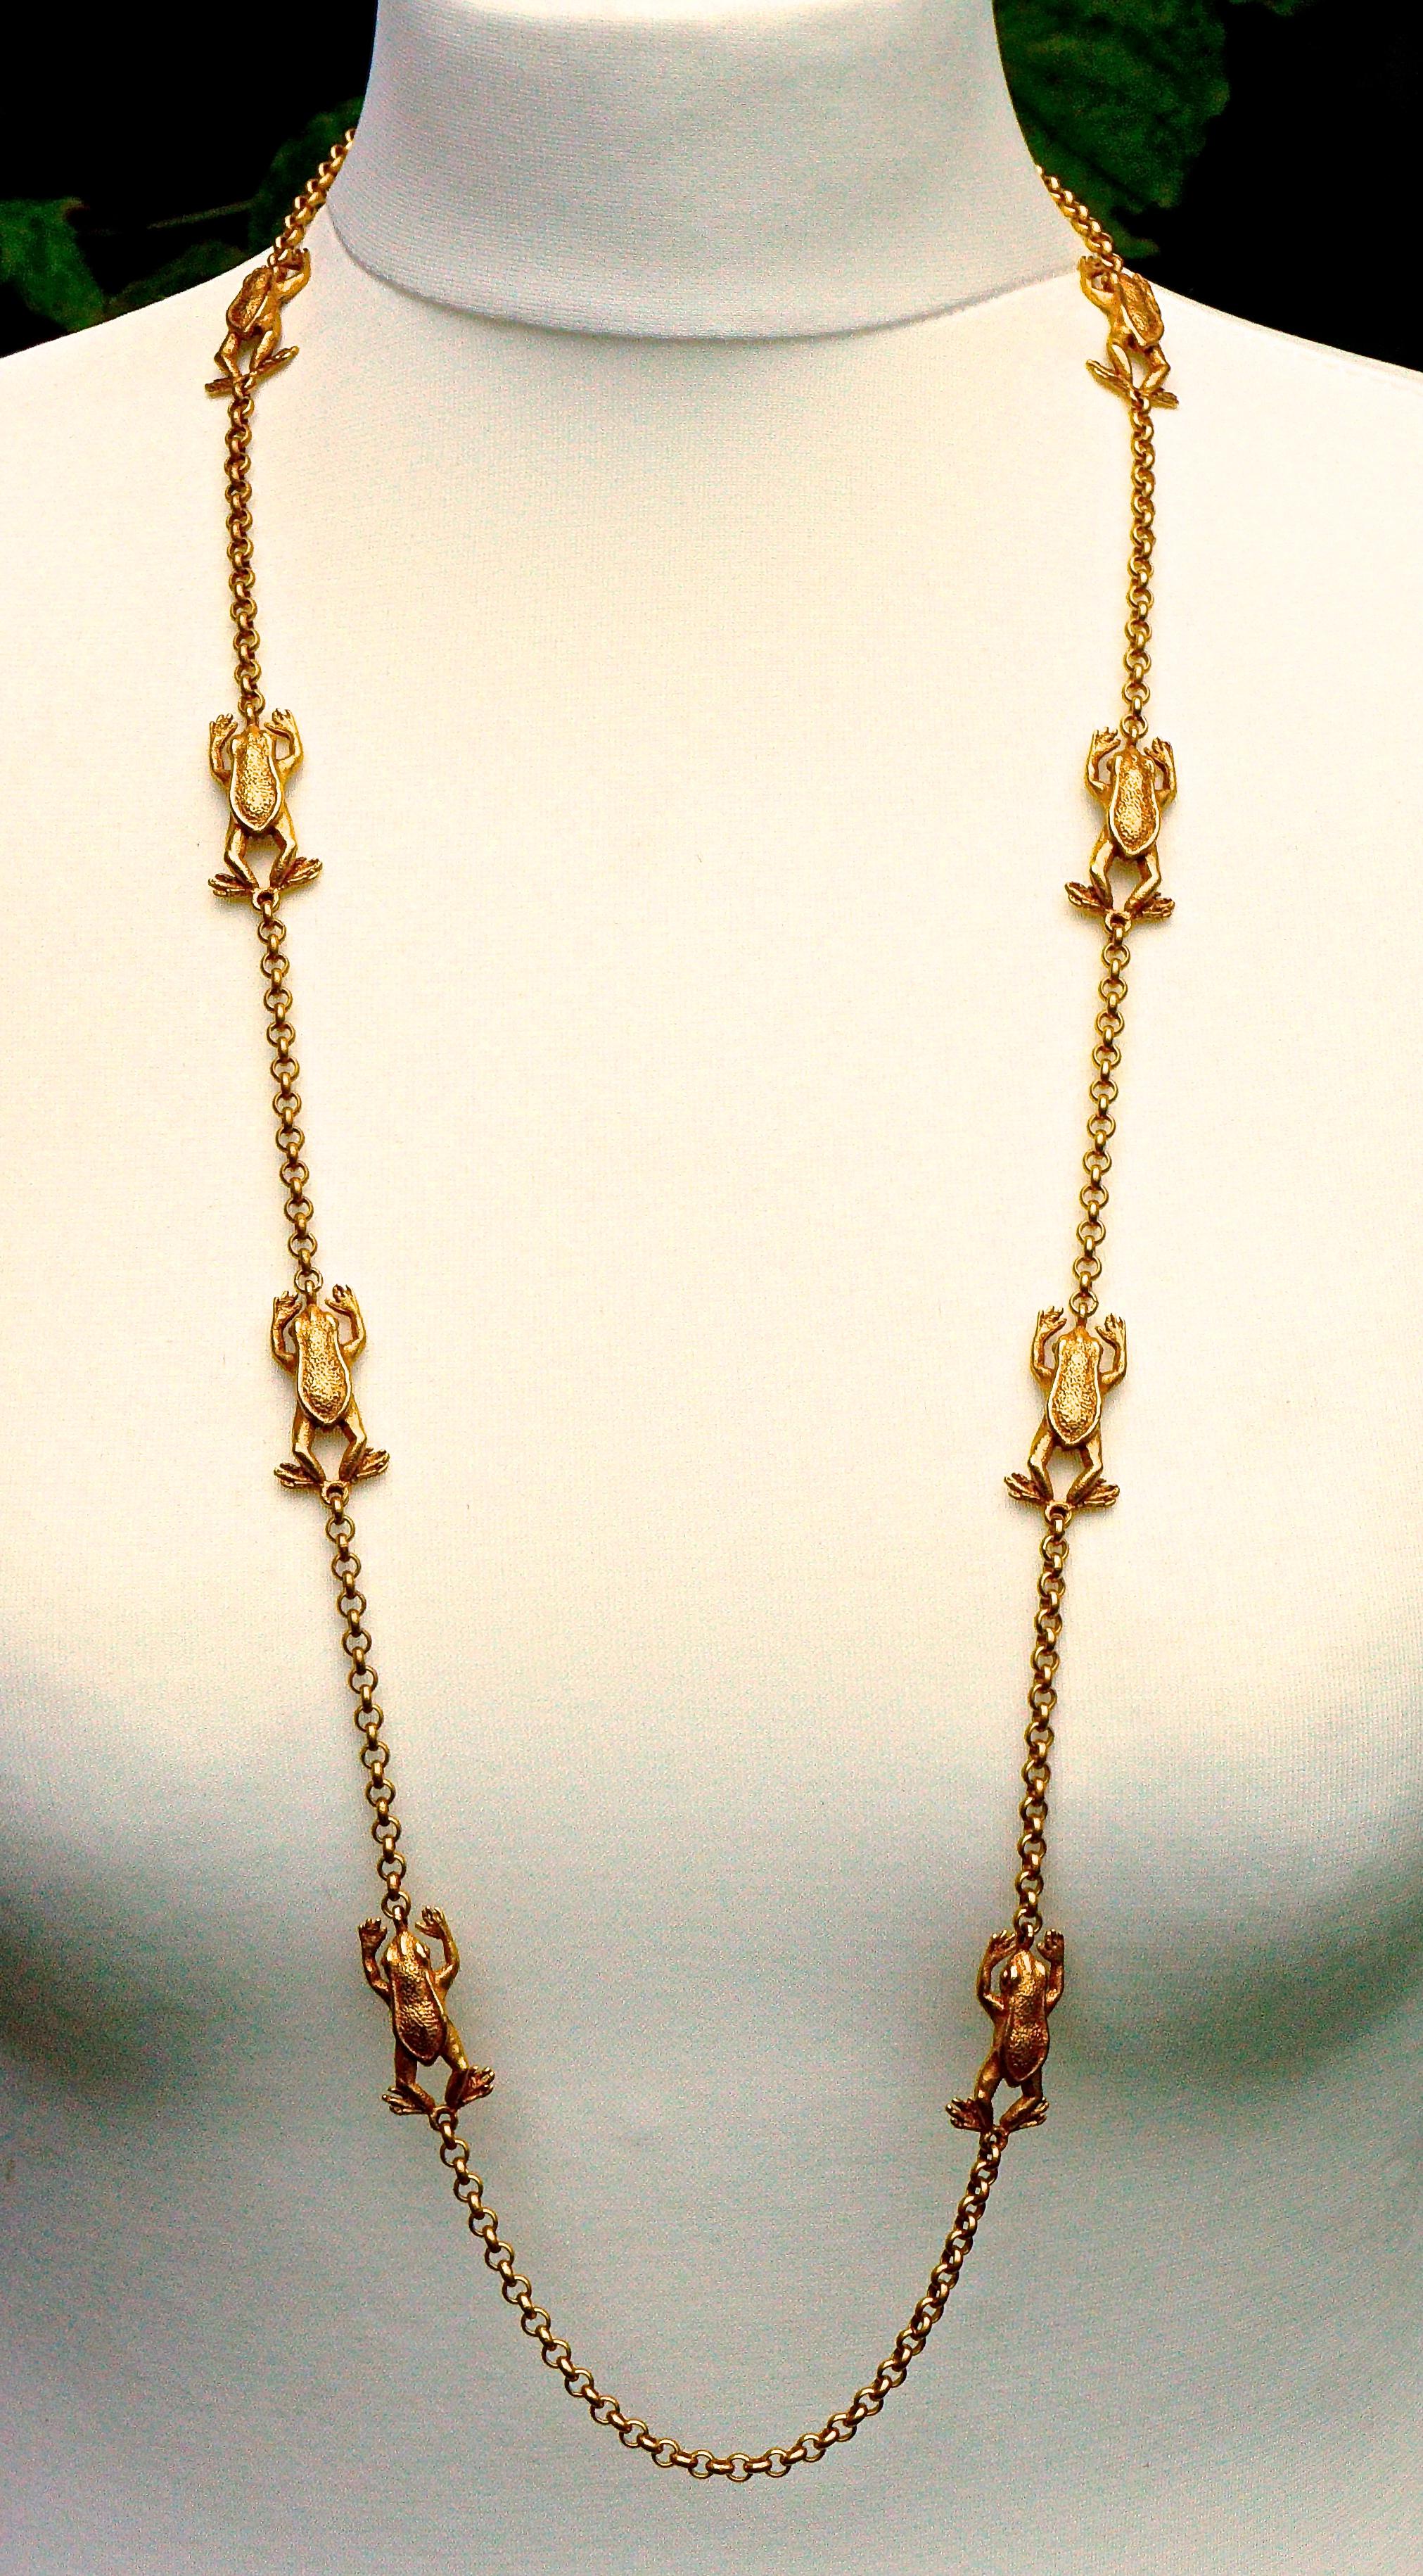 Askew London Long Gold Plated Frog Link Chain Necklace with a Flower Clasp 2